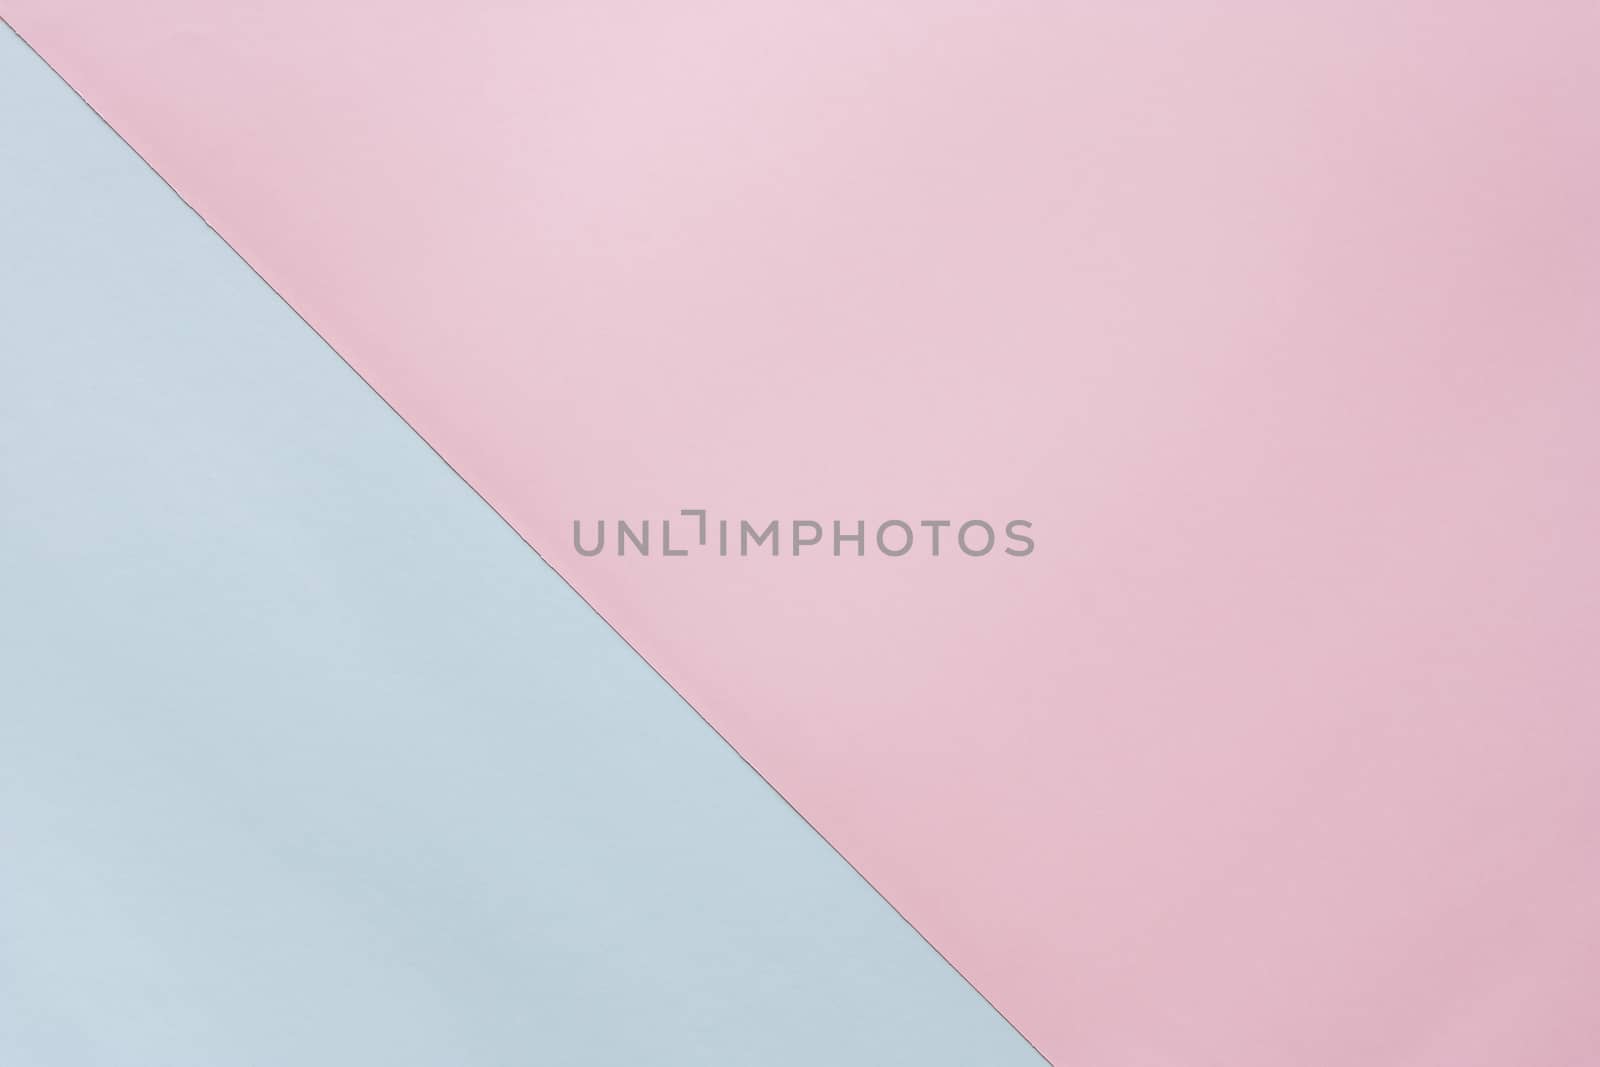 Blue and pink pastel colored paper for background